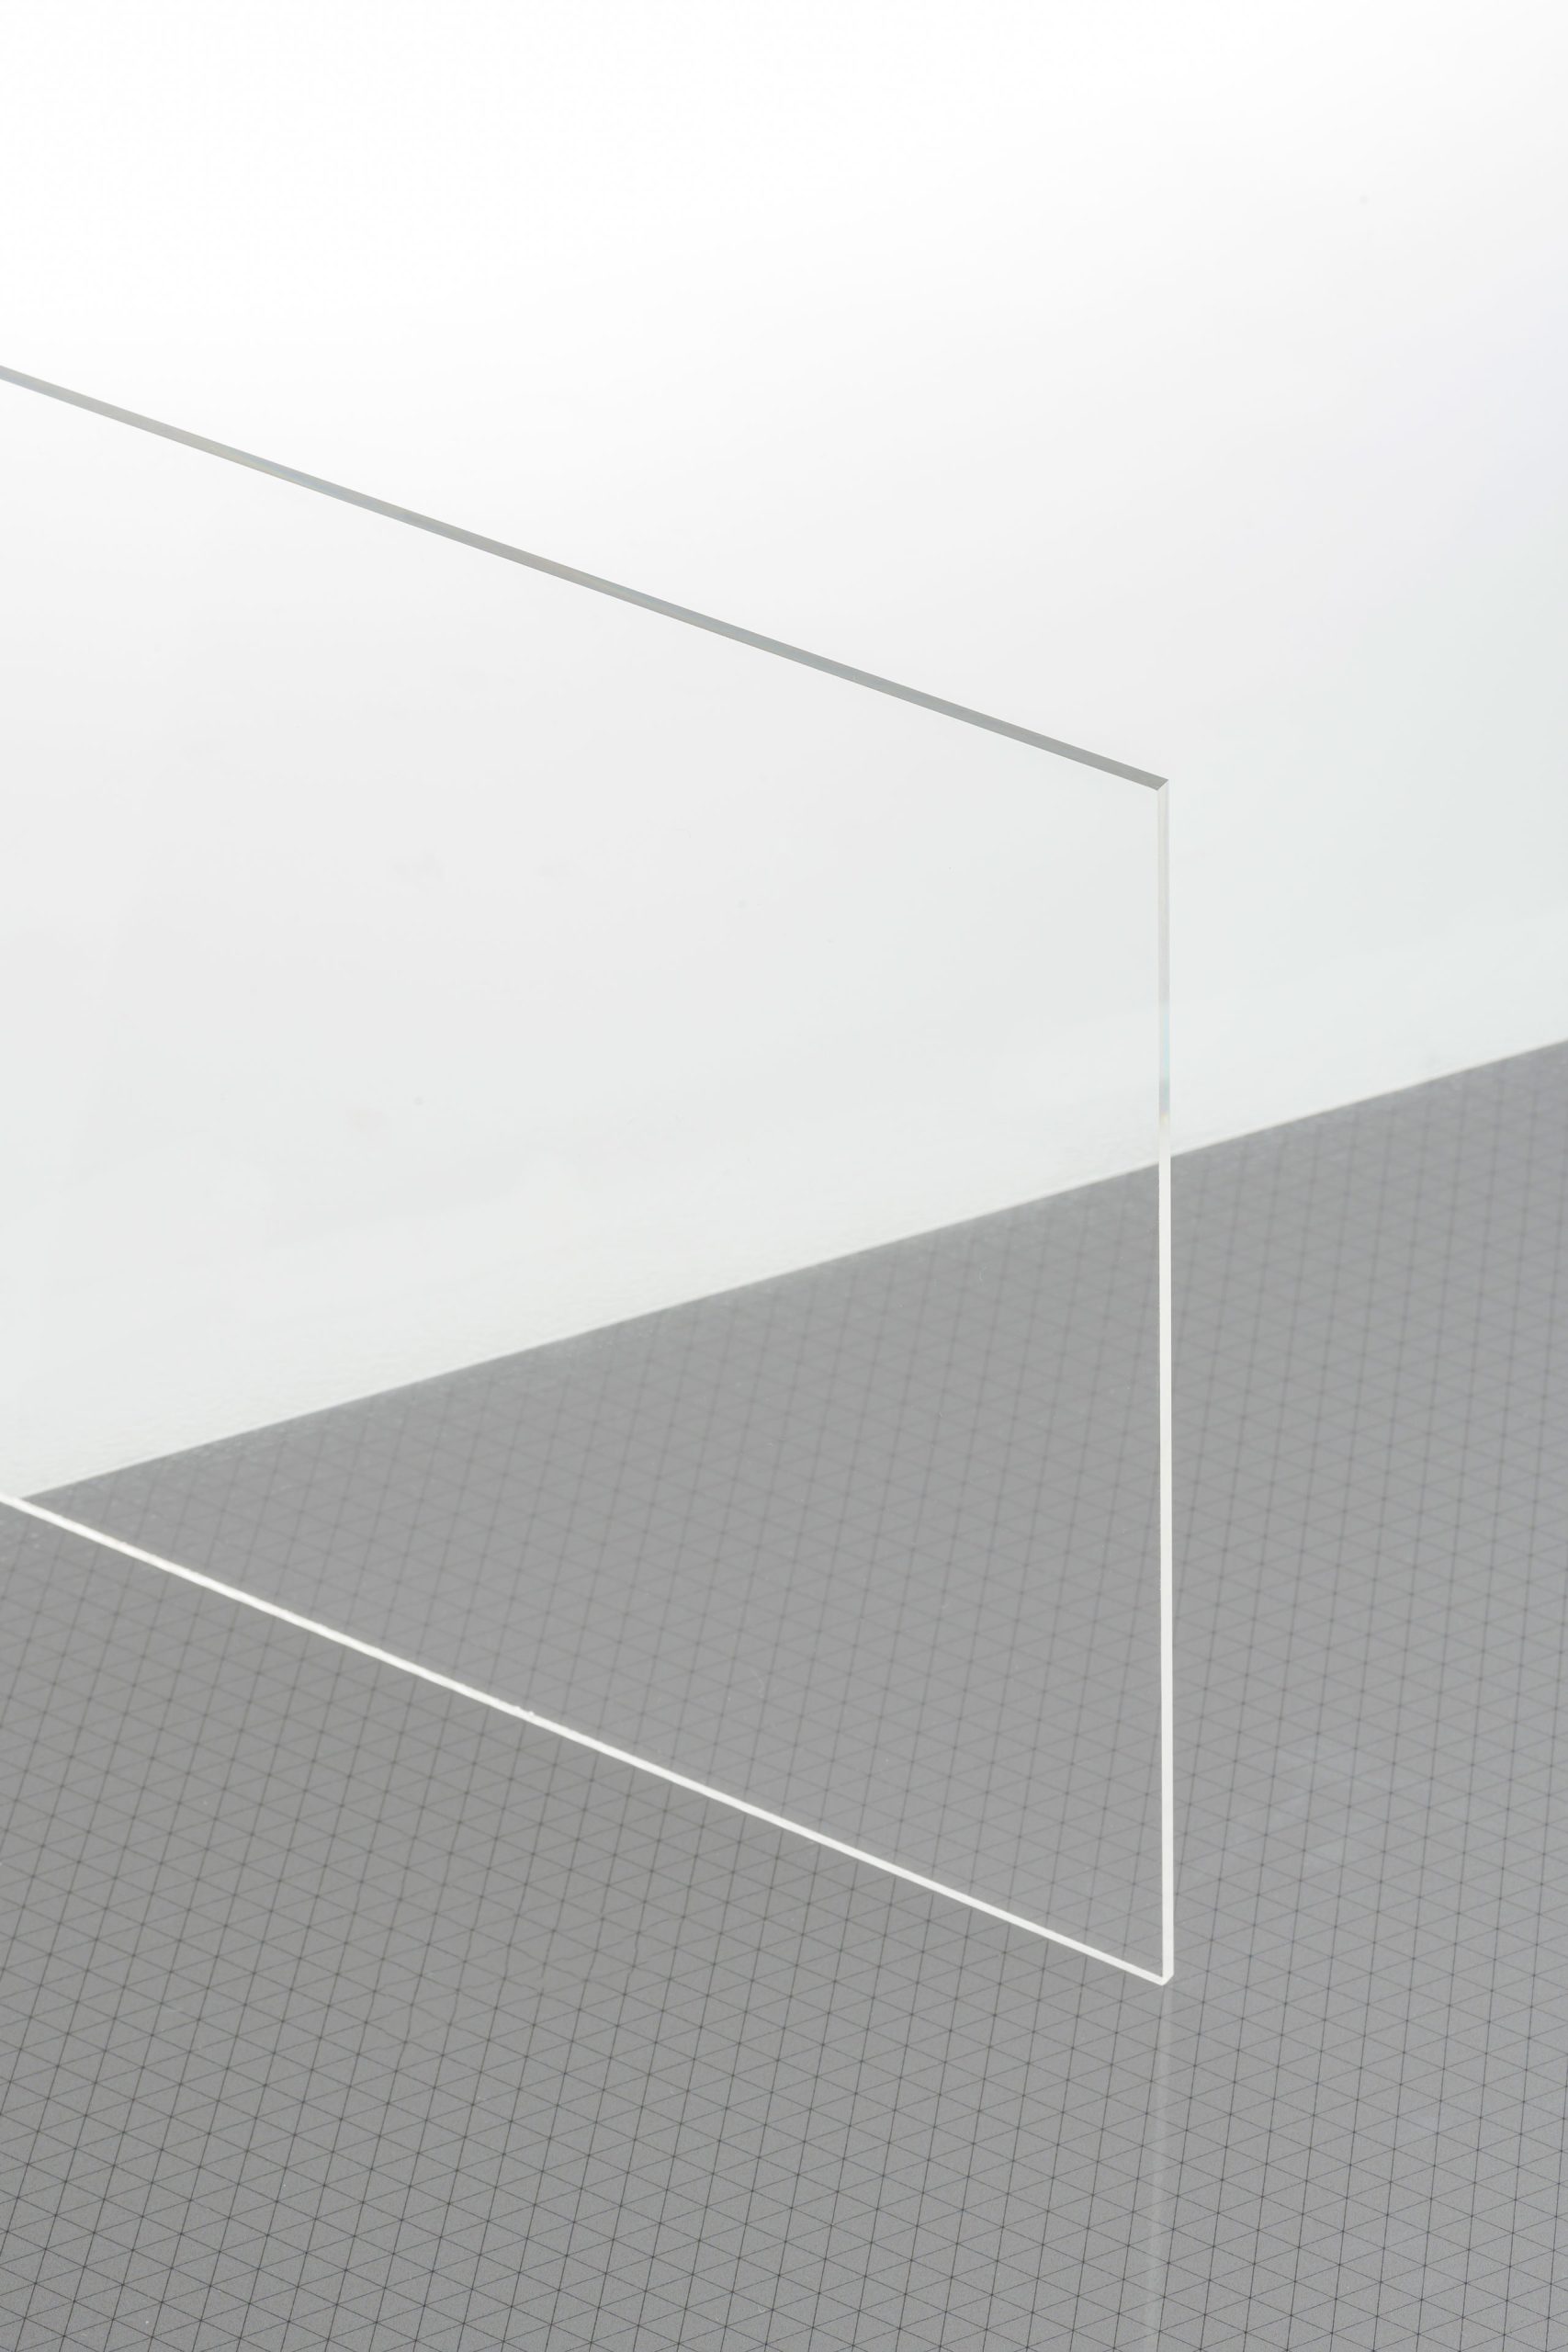 Clear Acrylic Perspex Sheet Buy Online In Australia Plastic Direct